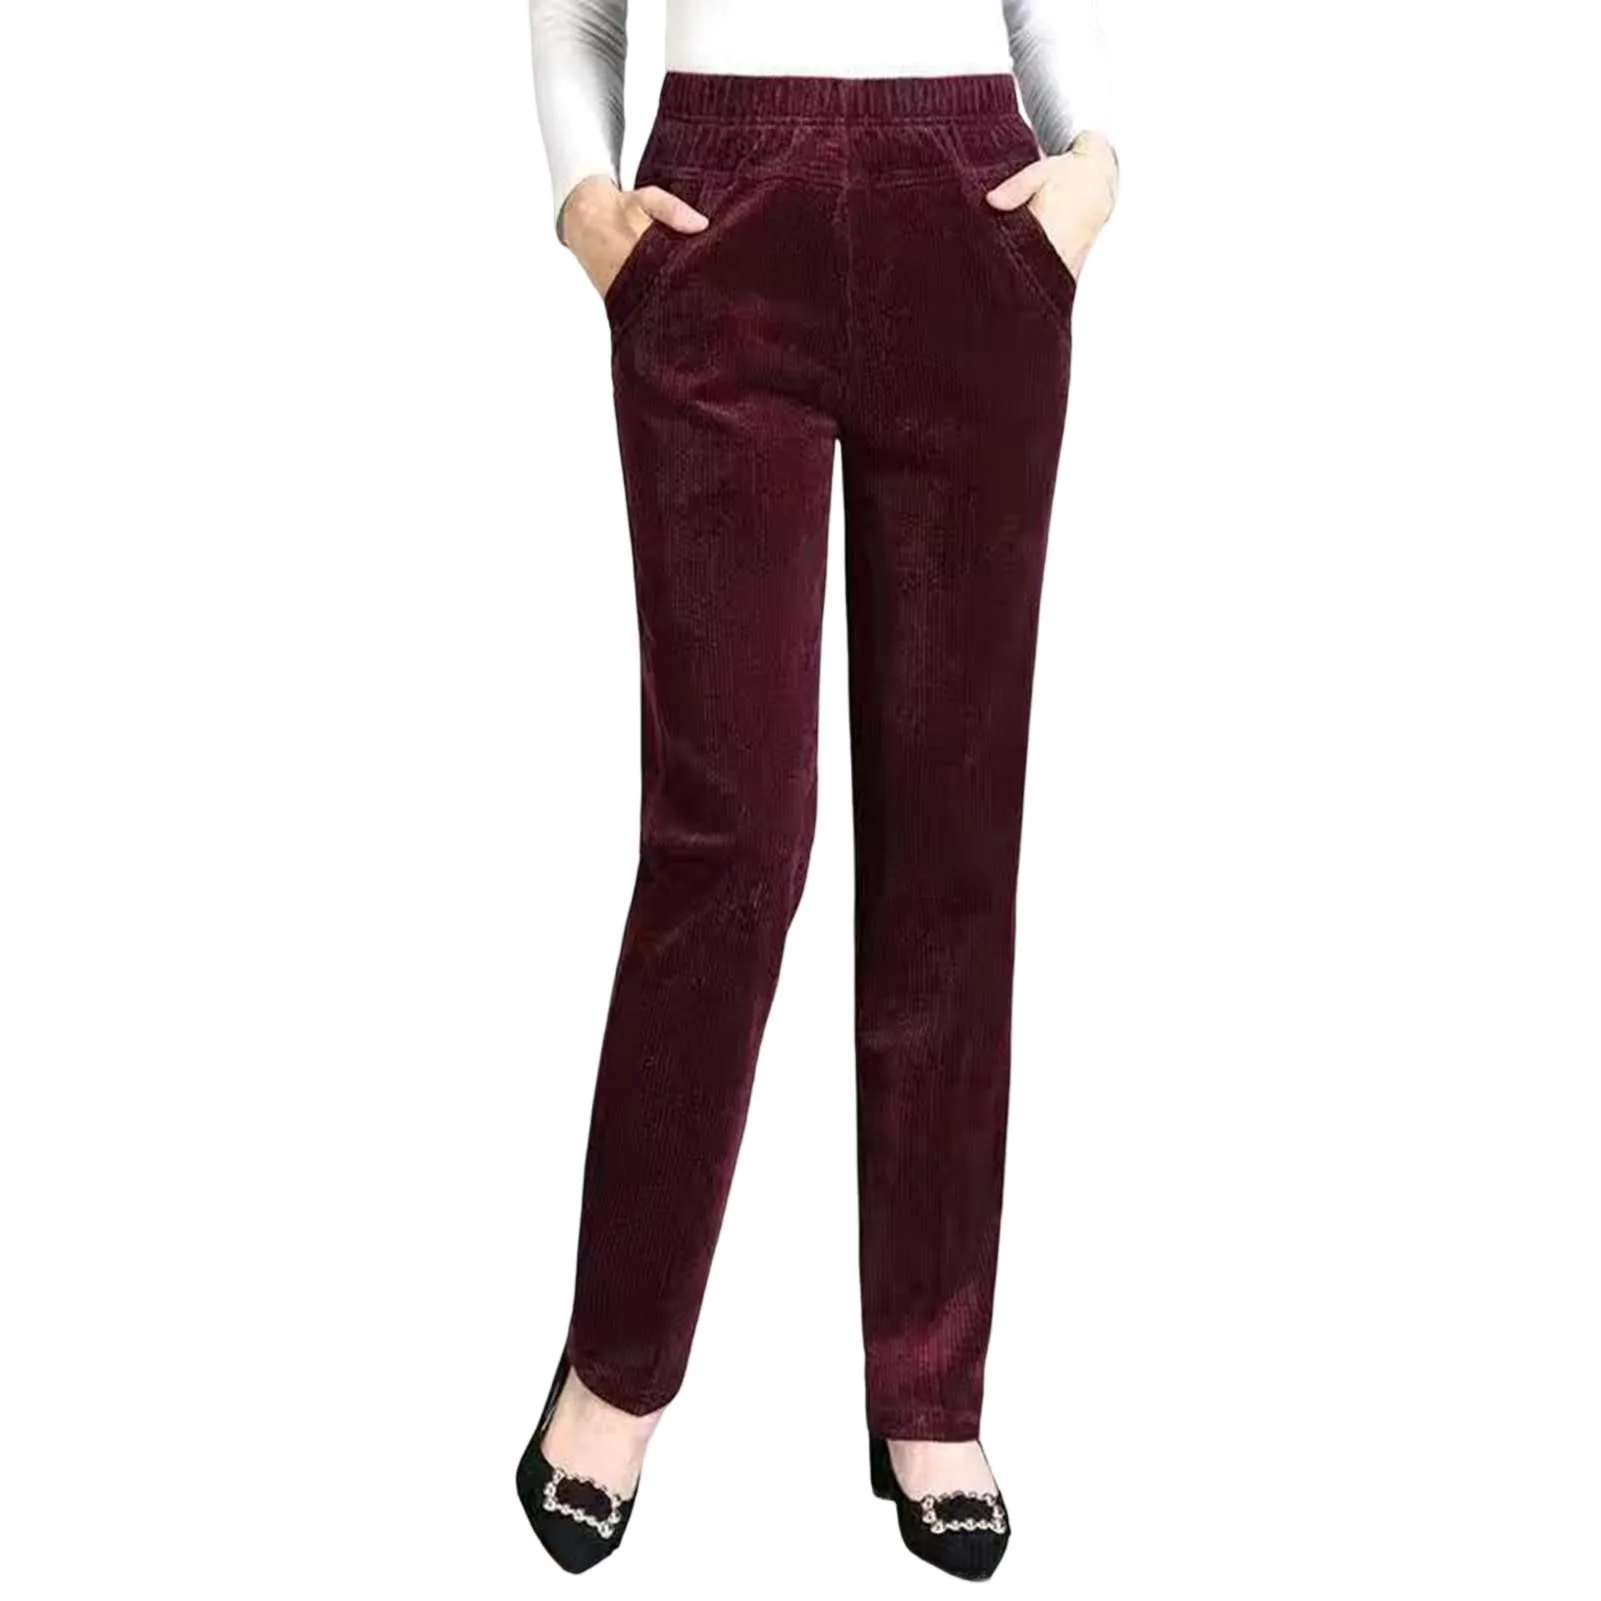 

Women's Solid Color Corduroy Pants Wear-Resistant and Breathable Fabric Pants for Shopping Traveling Dating Working